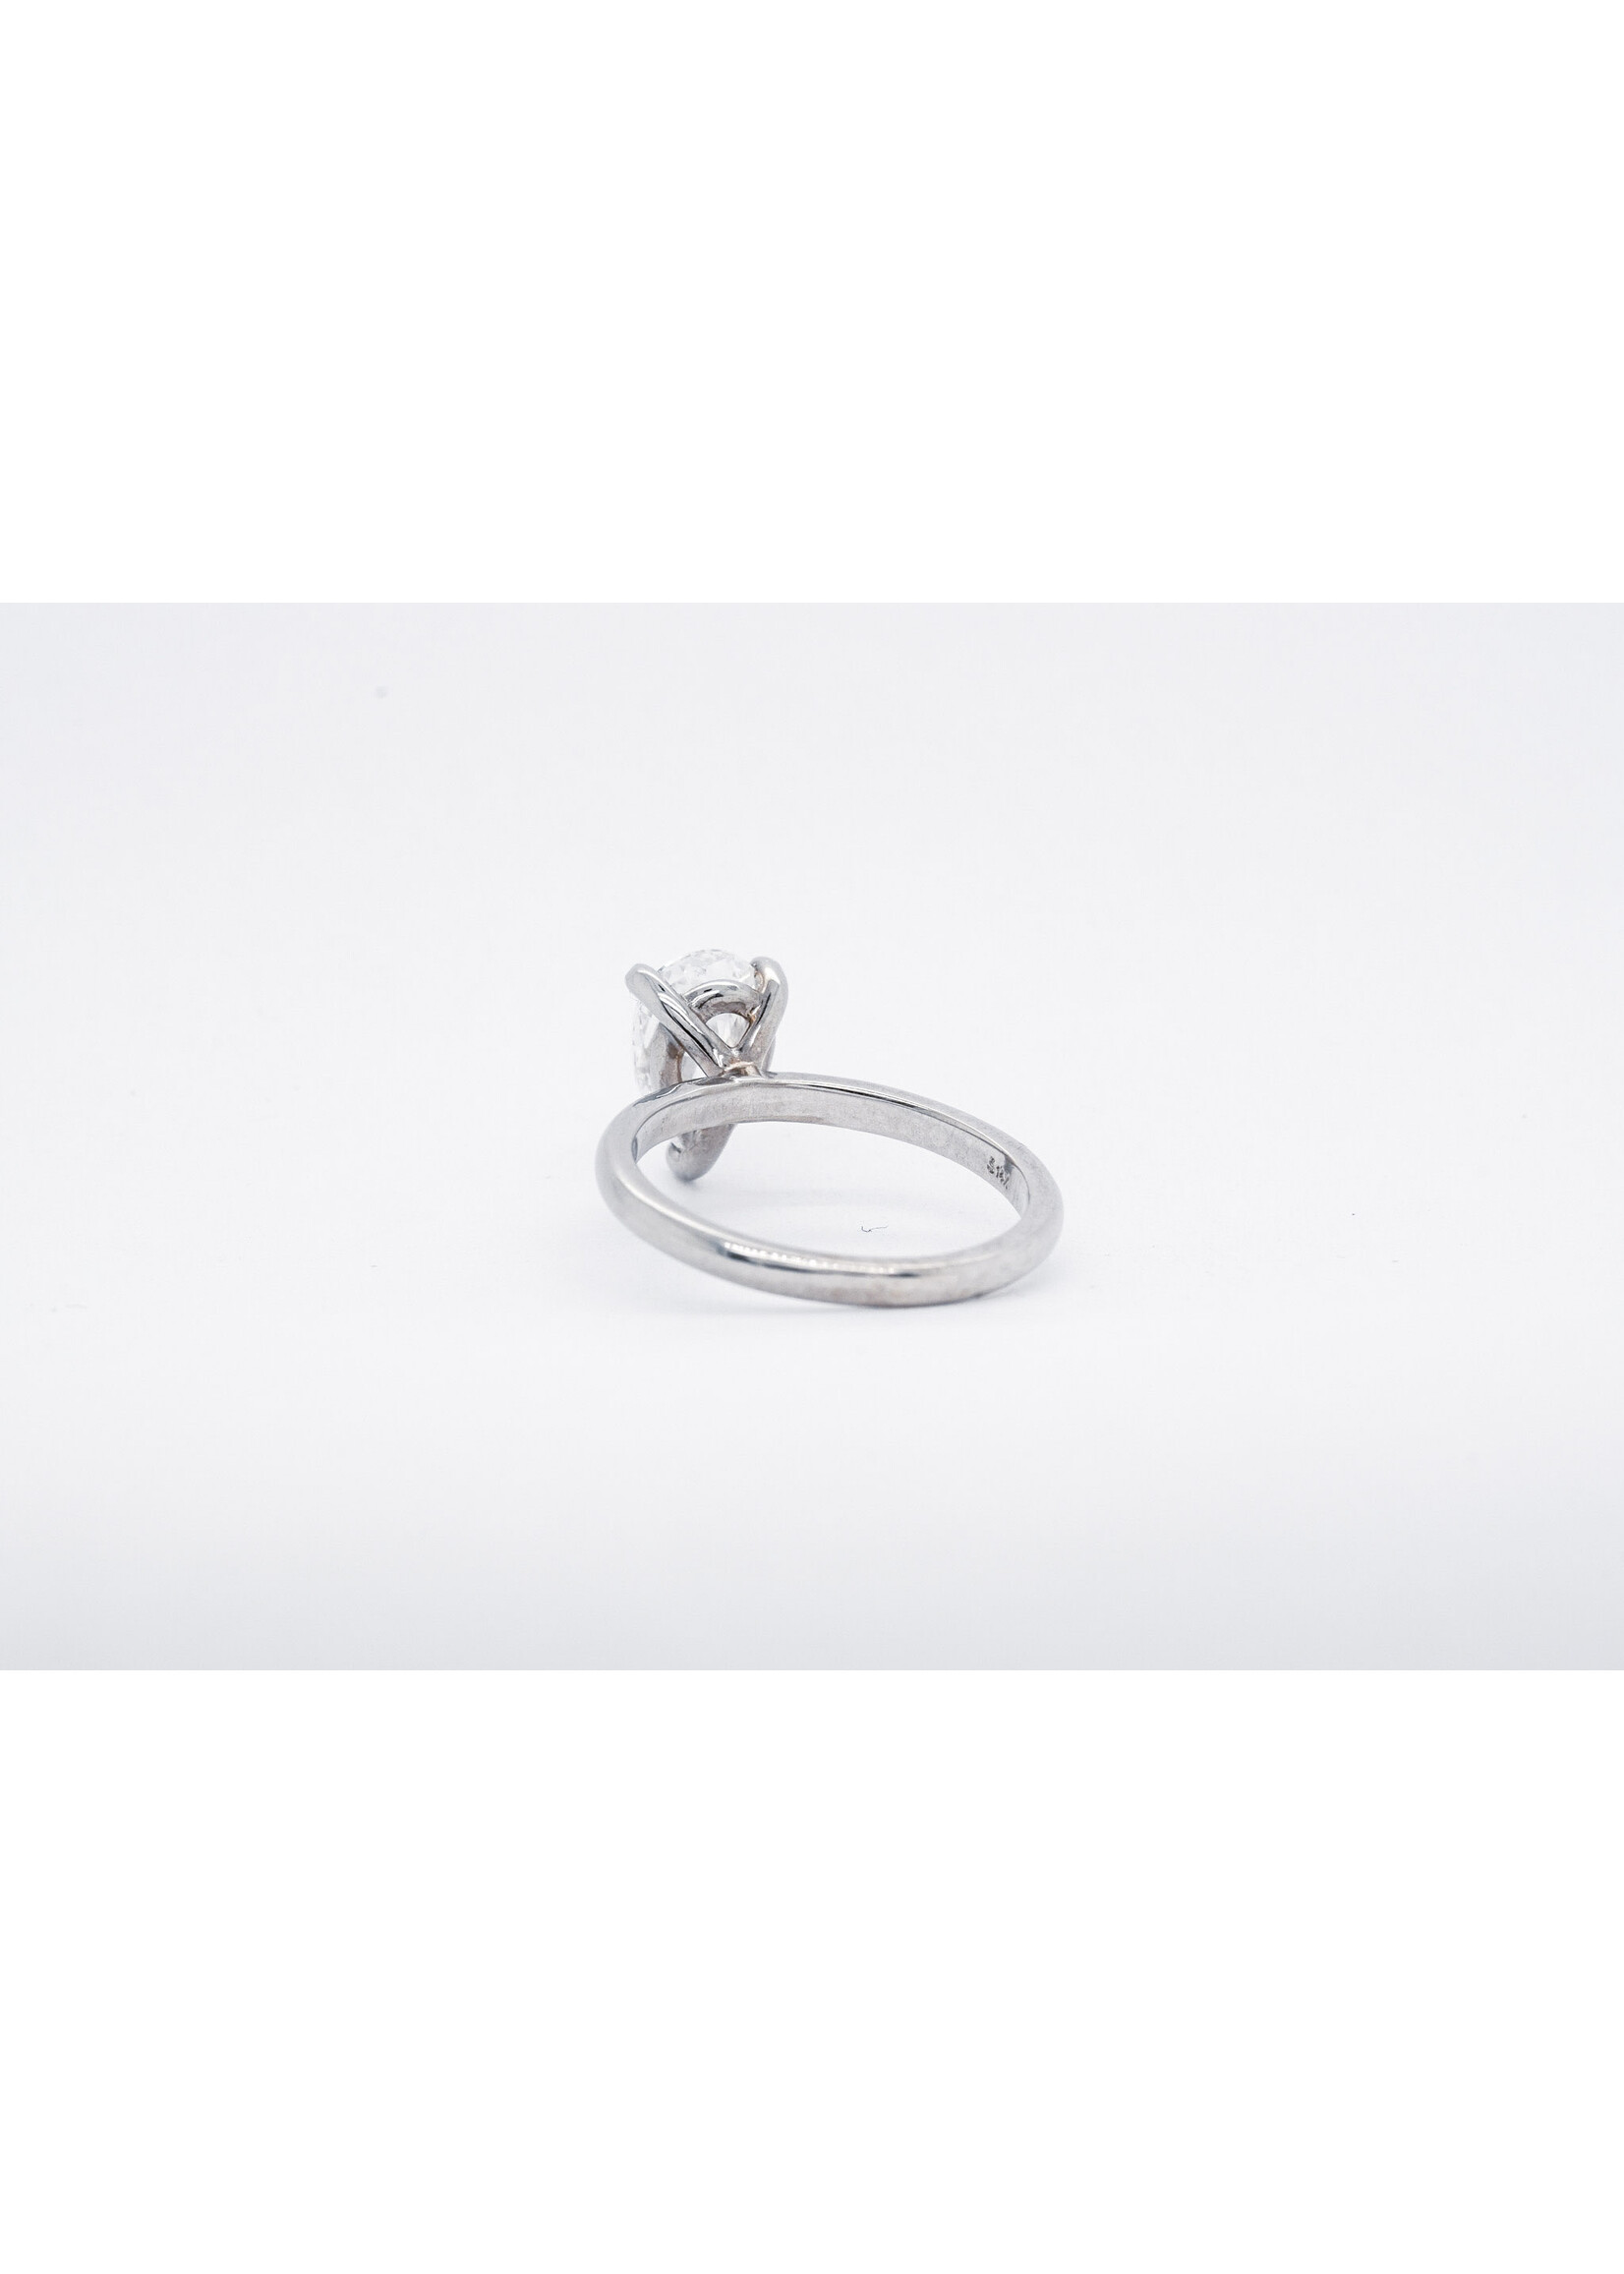 14KW 3.36g 1.62ct E/SI1 GIA Pear Cut Diamond Solitaire Engagement Ring (size 6.25)